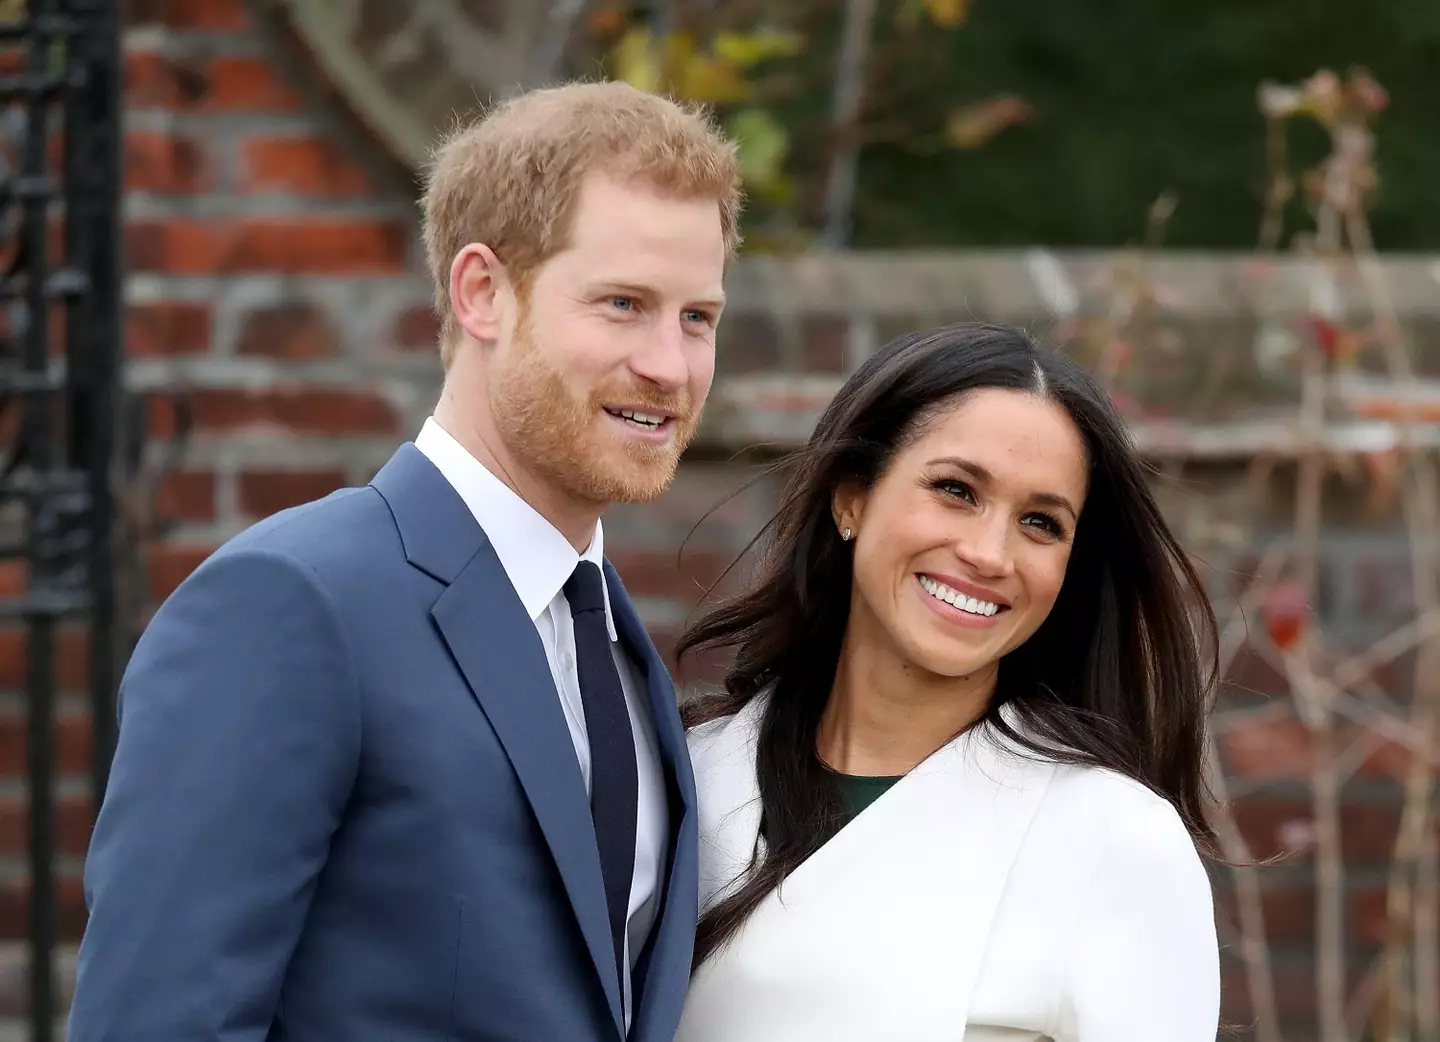 Prince Harry and Meghan Markle stepped down as senior royals in 2020 and moved to America.